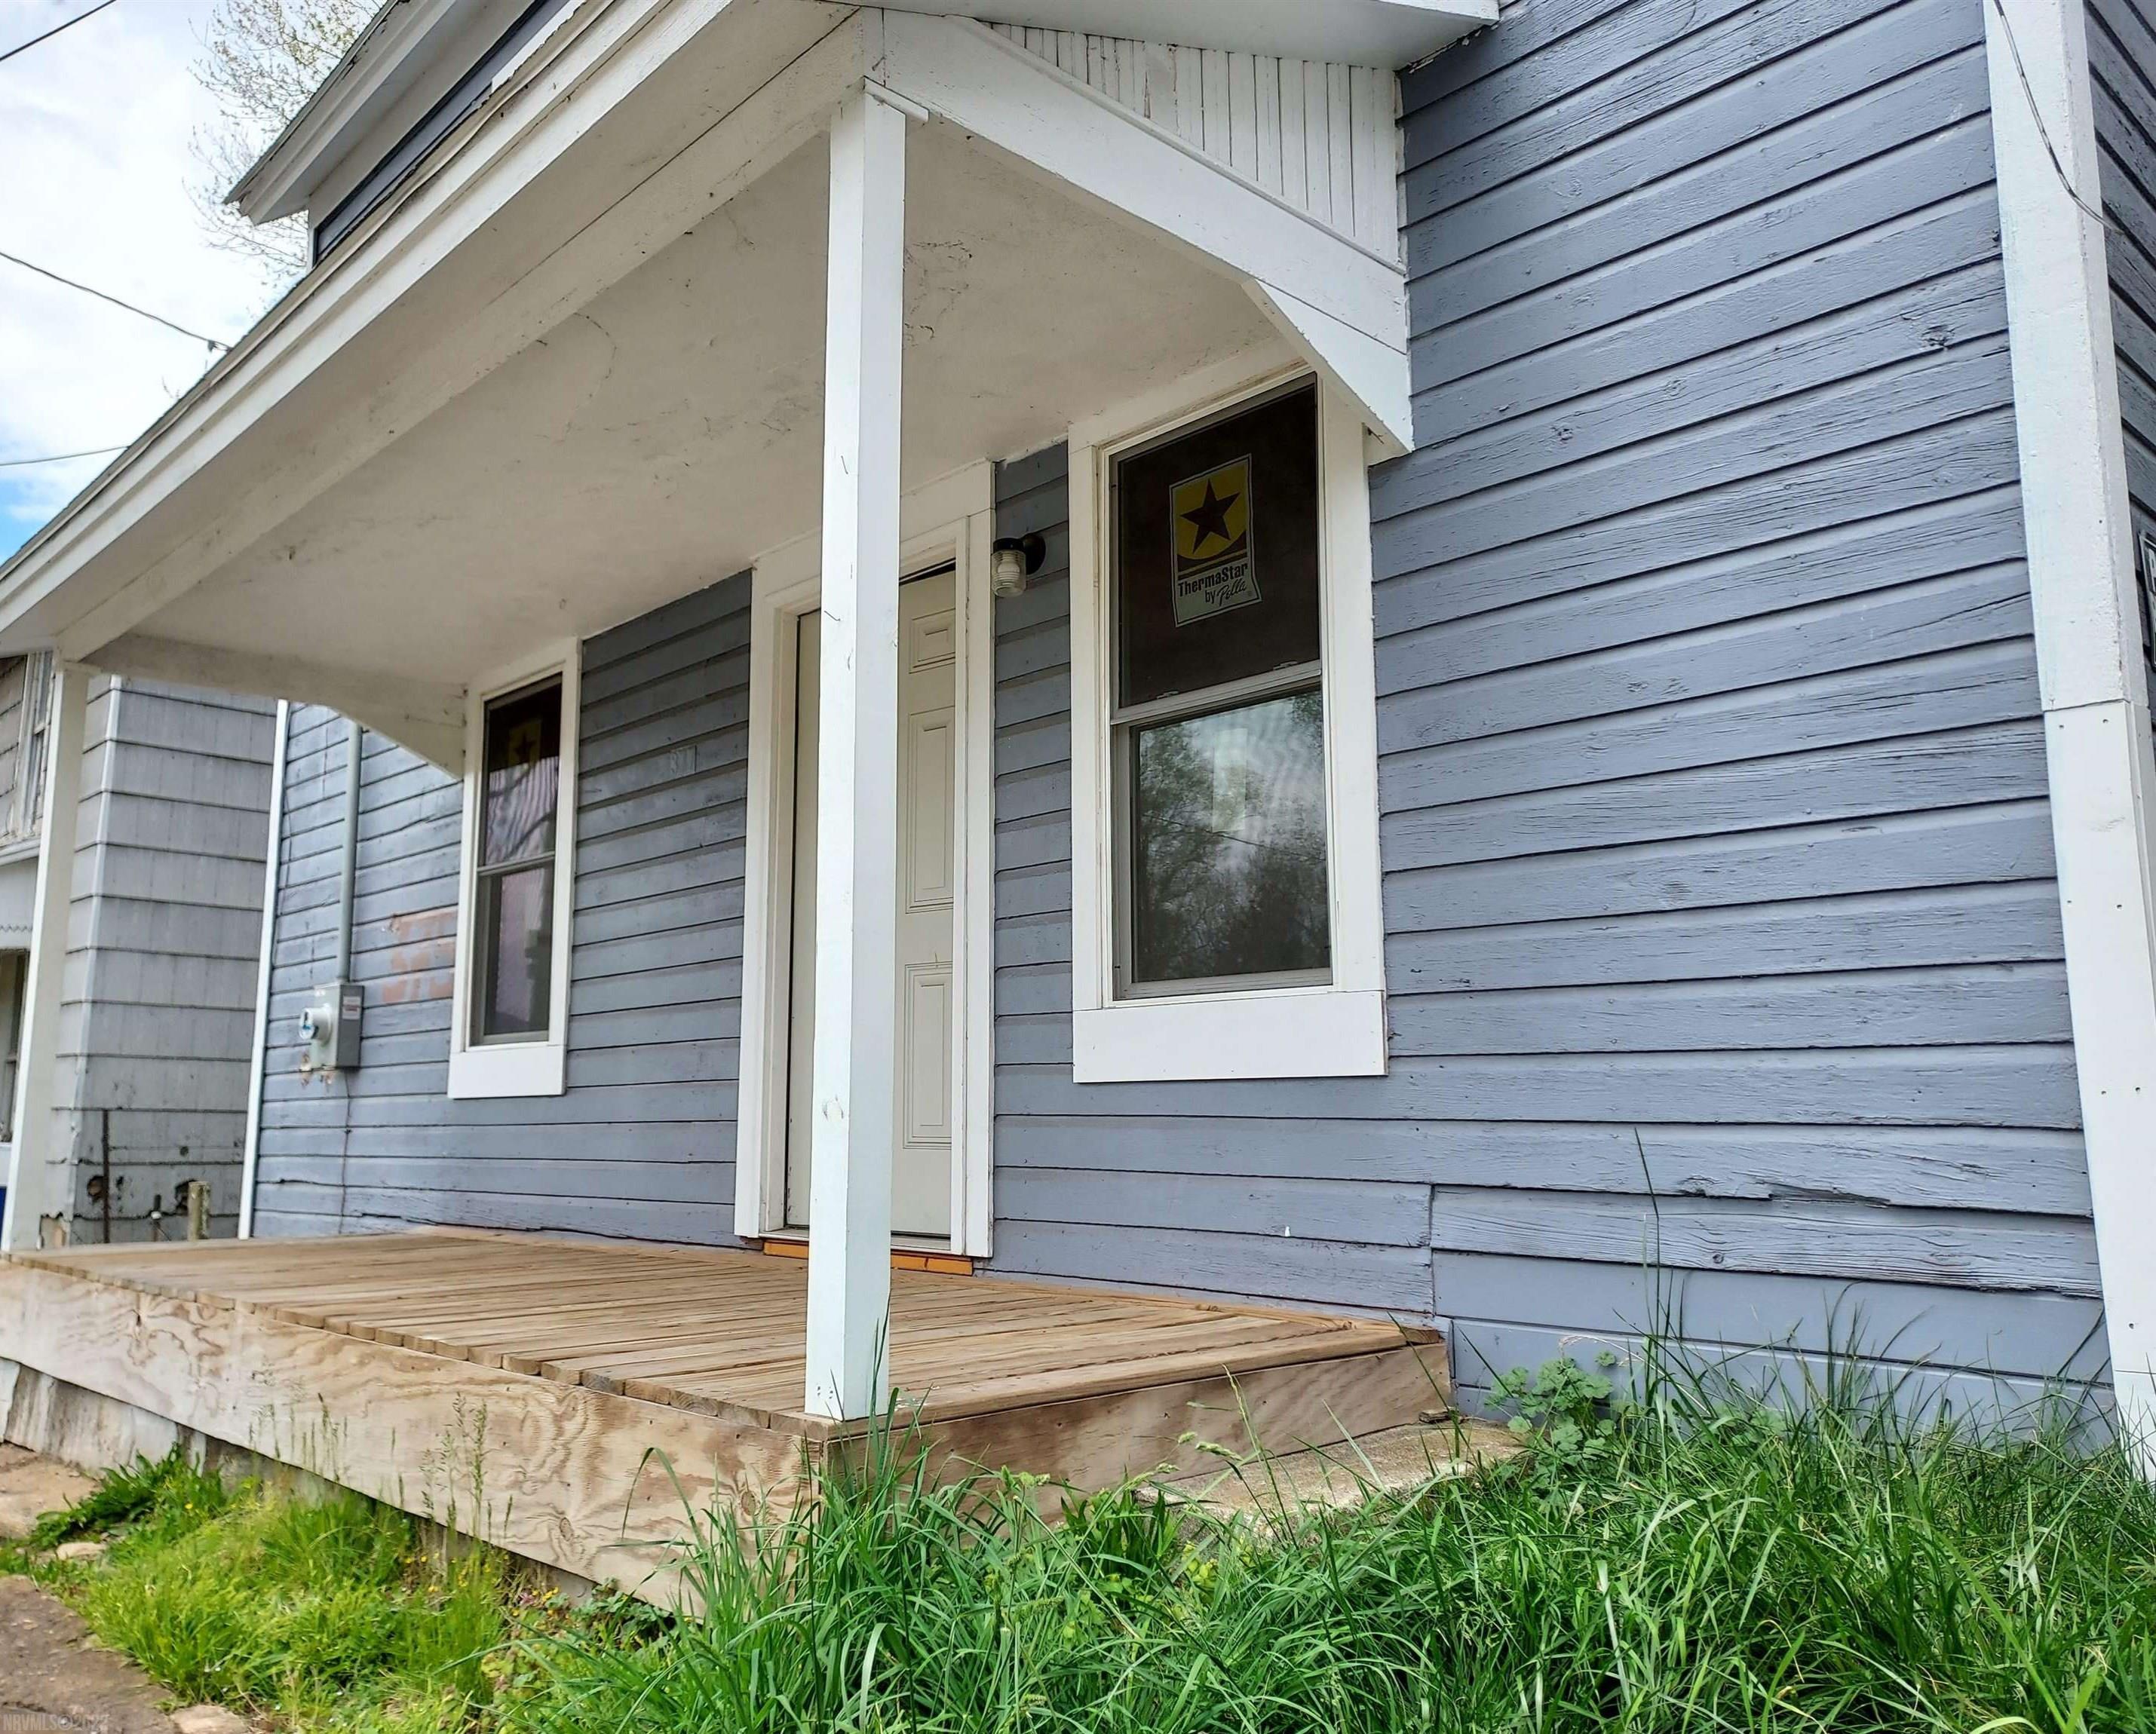 Handyman Special!  This old house has been partially renovated and needs a little extra effort to bring her across the finish line.  Renovations include new electric, new windows, new kitchen & bath, new flooring and new washer/dryer hookup.